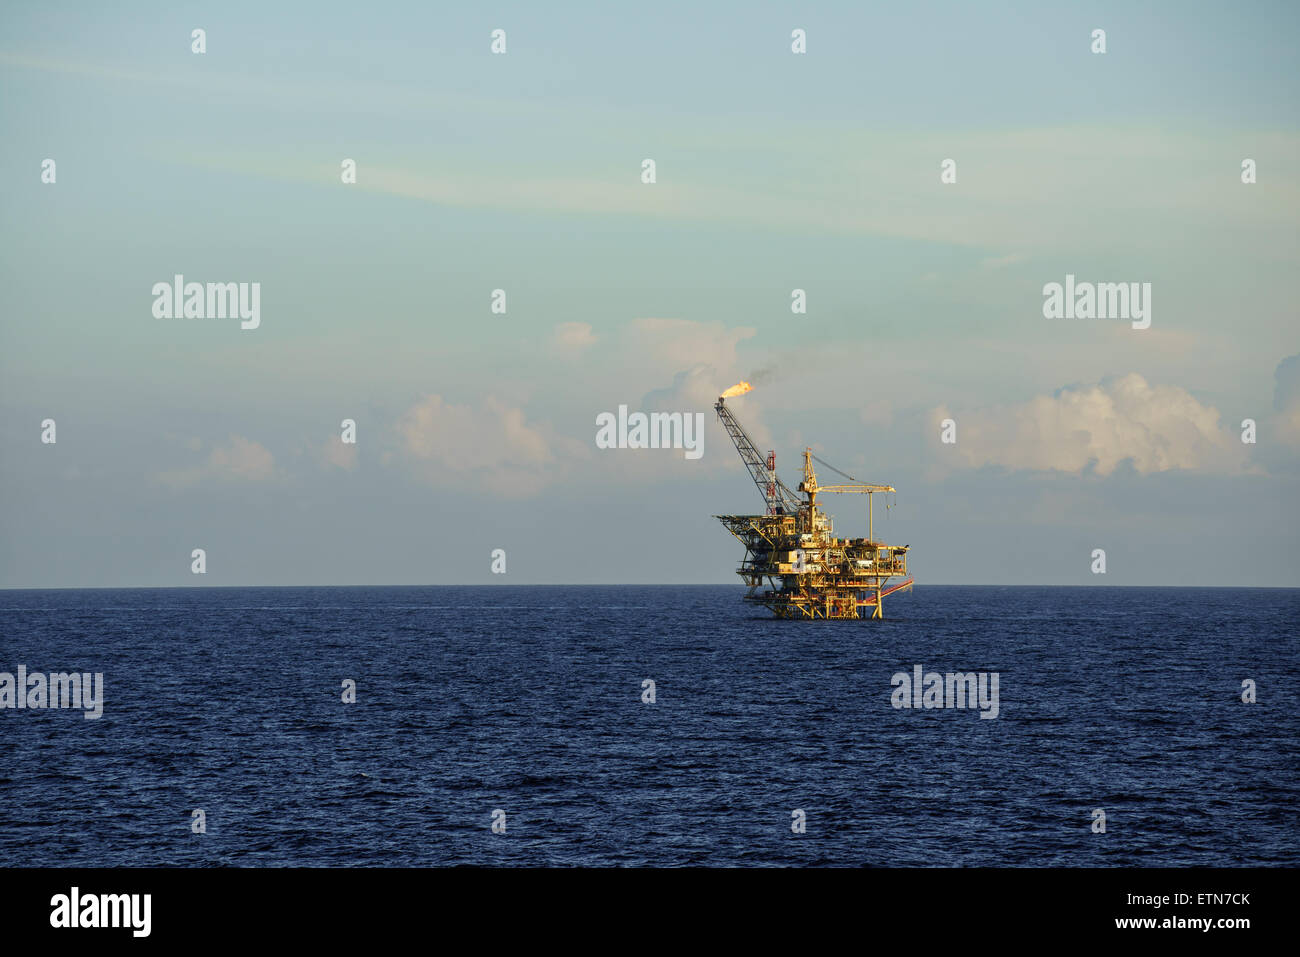 Offshore oil platform in operation at sea Stock Photo